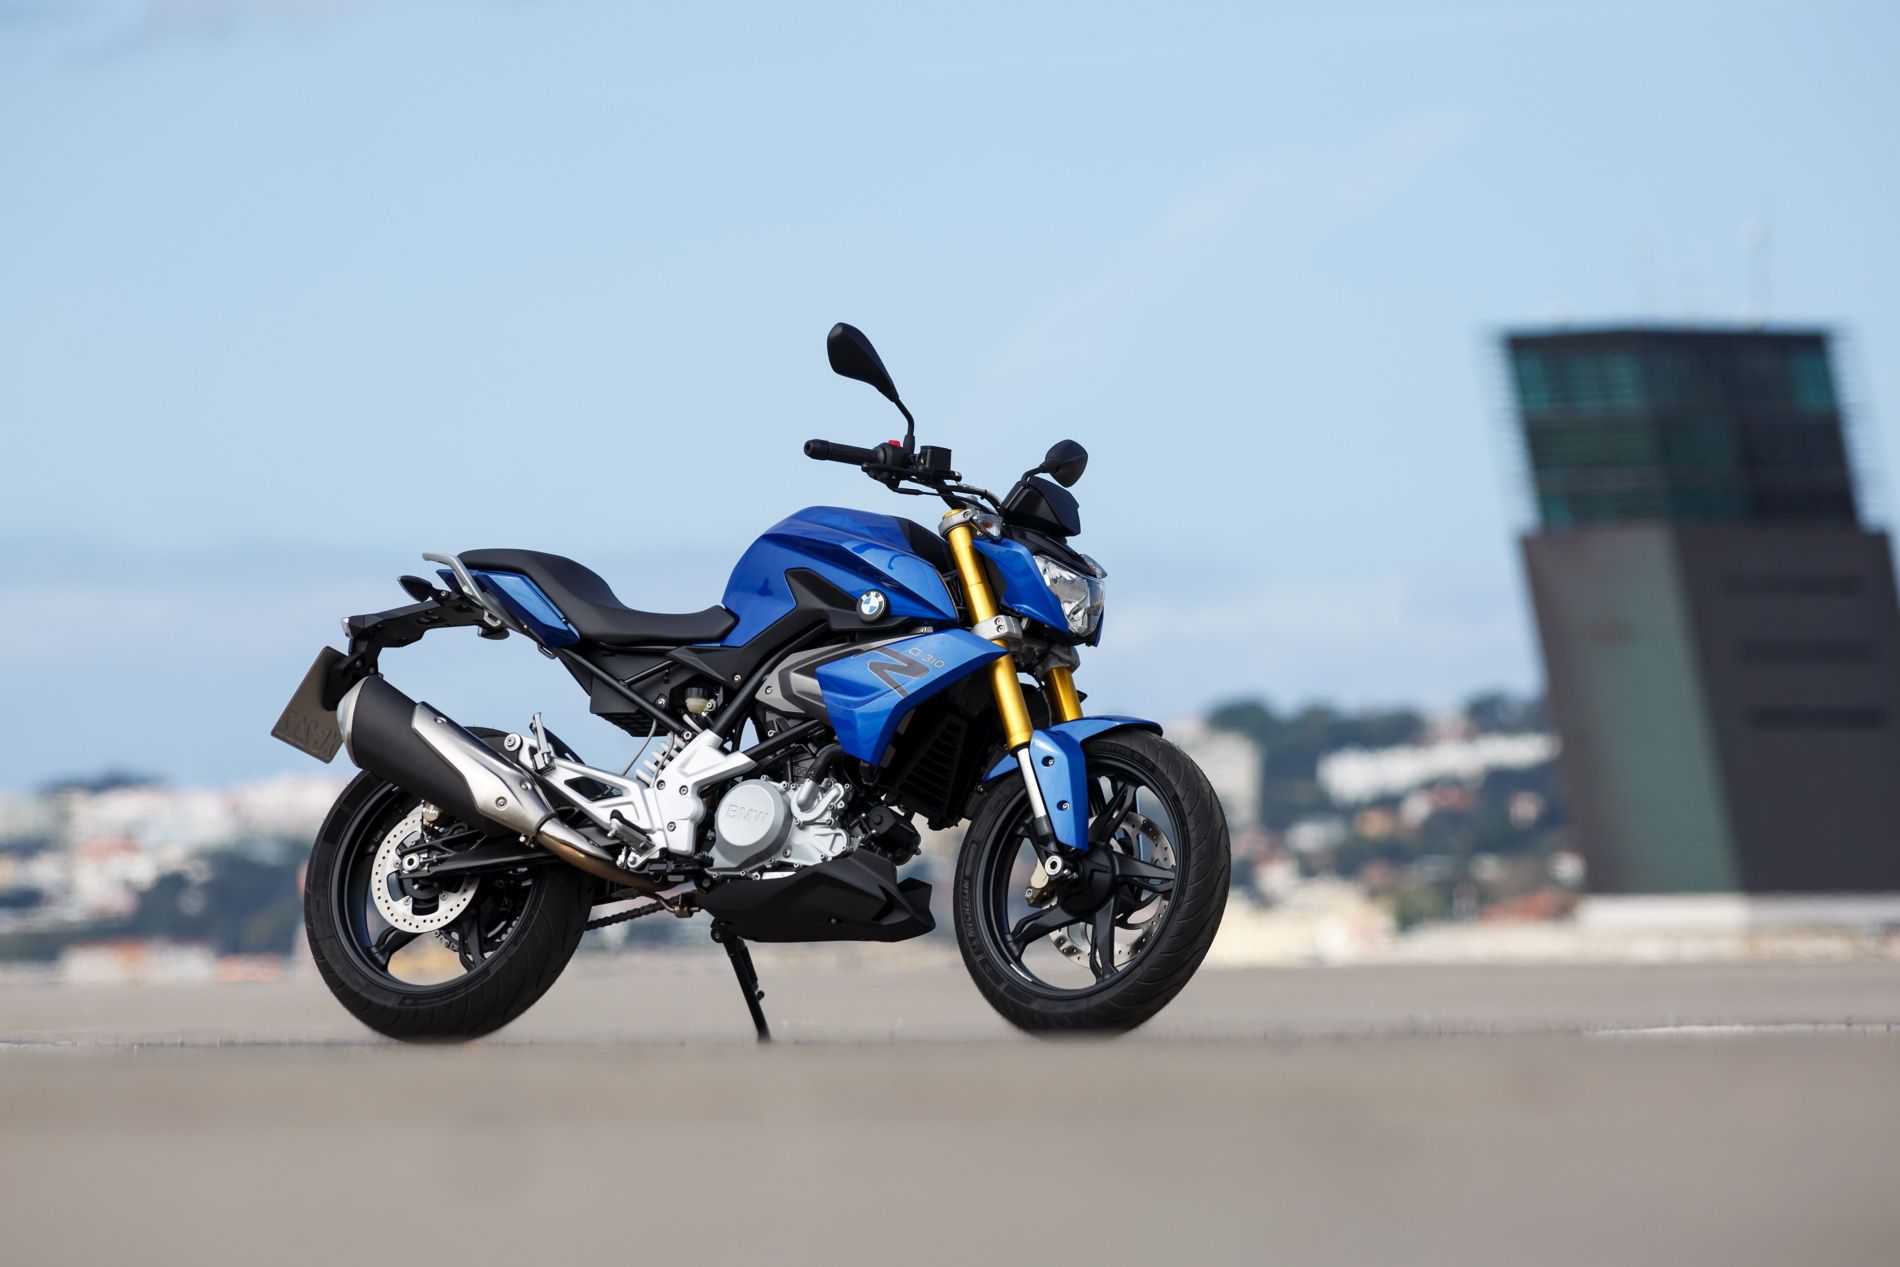 Rumor: TVS to unveil a sportbike sibling to BMW's G 310 R? Could